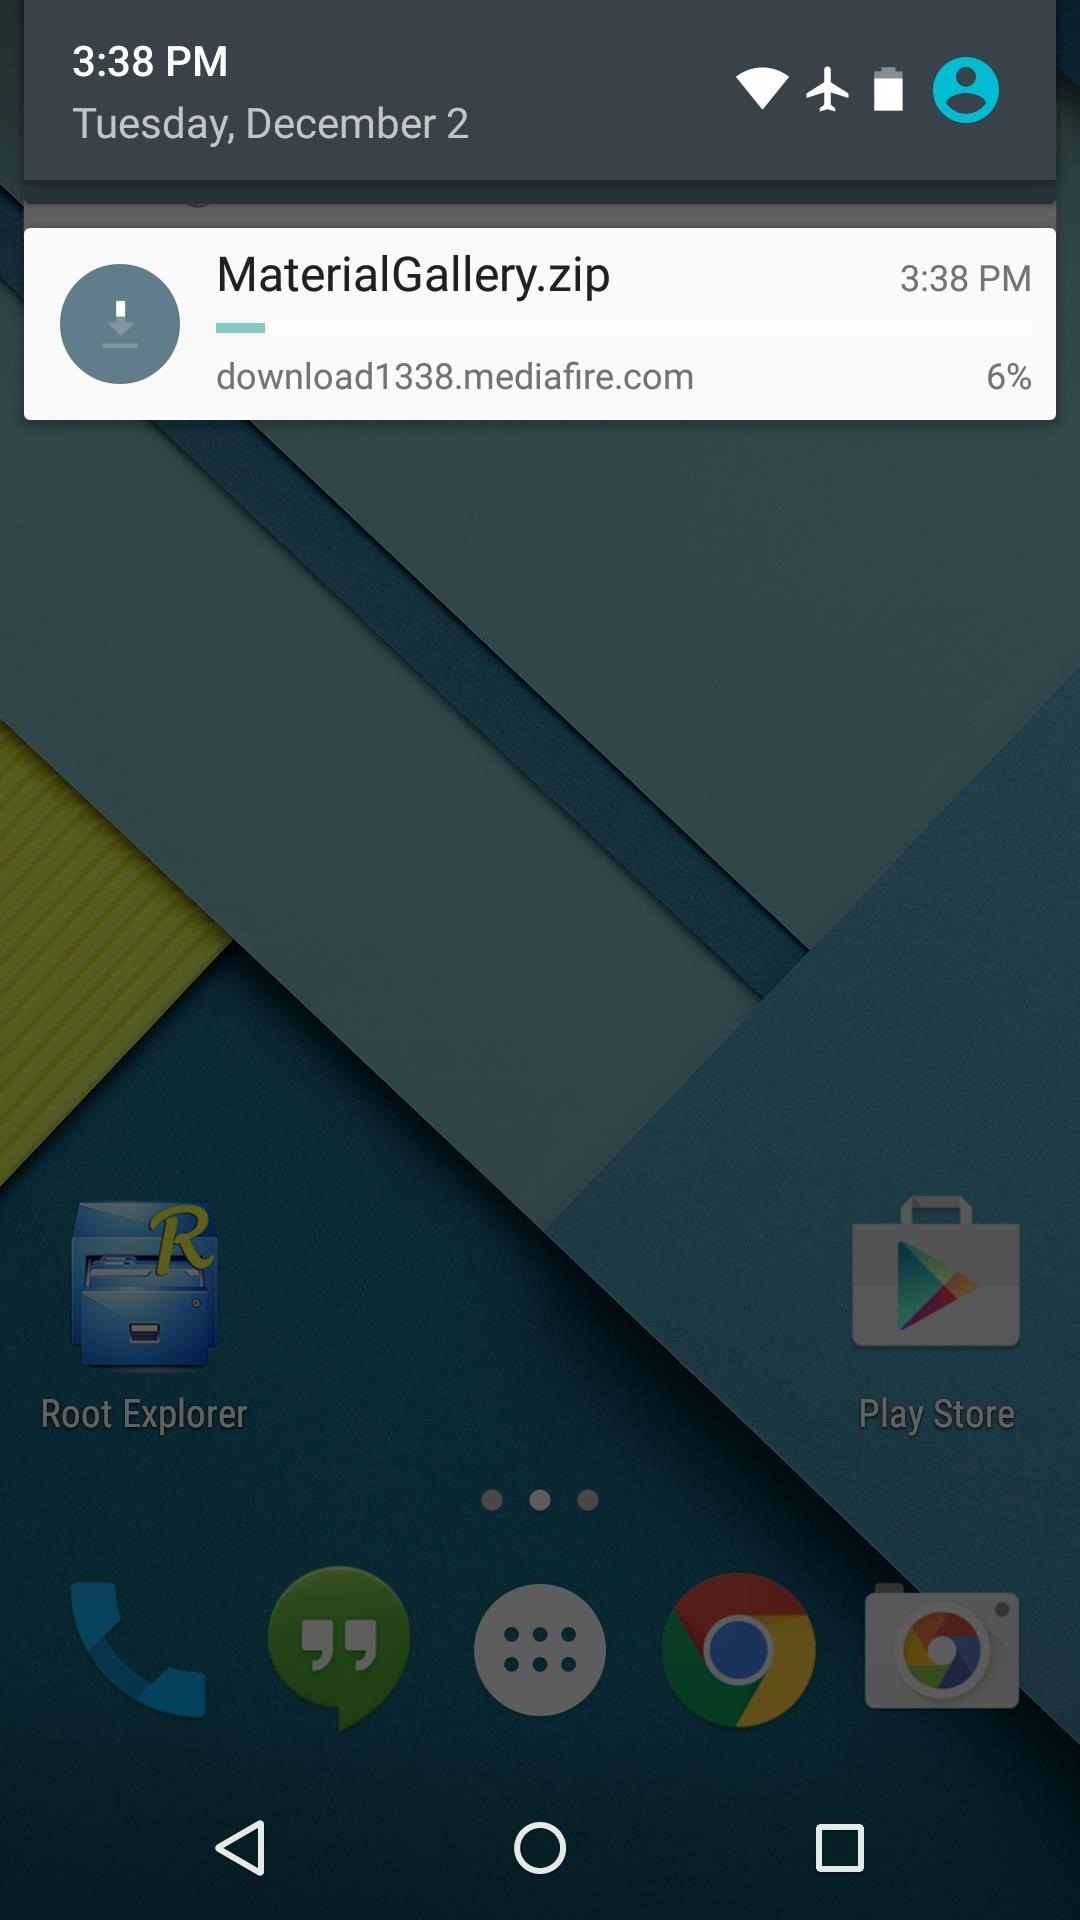 Get Back the Gallery App on Any Nexus Device Running Lollipop